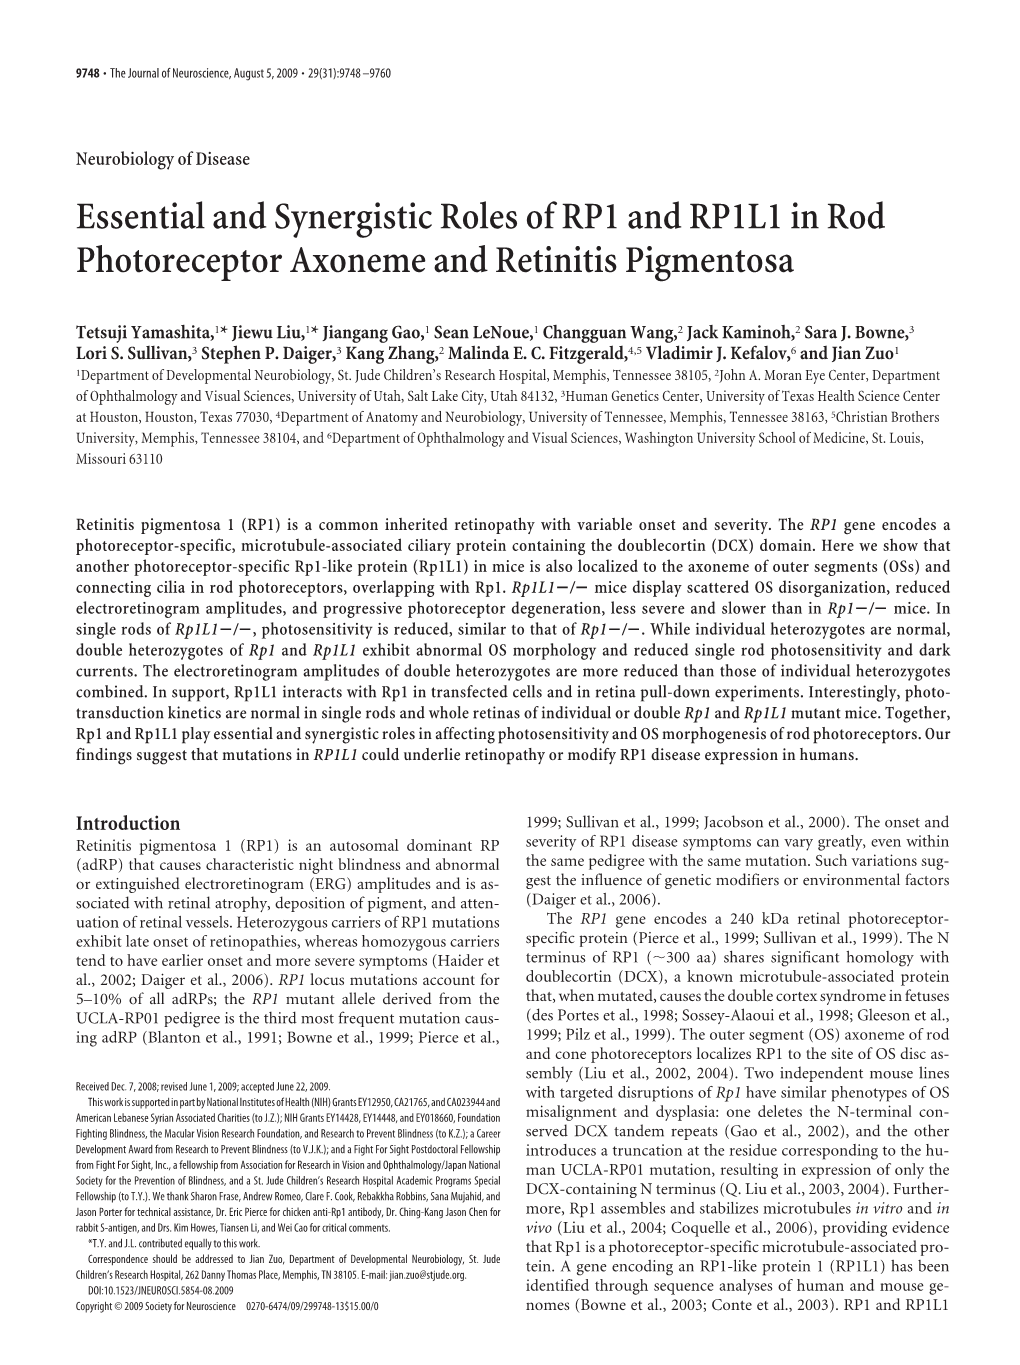 Essential and Synergistic Roles of RP1 and RP1L1 in Rod Photoreceptor Axoneme and Retinitis Pigmentosa